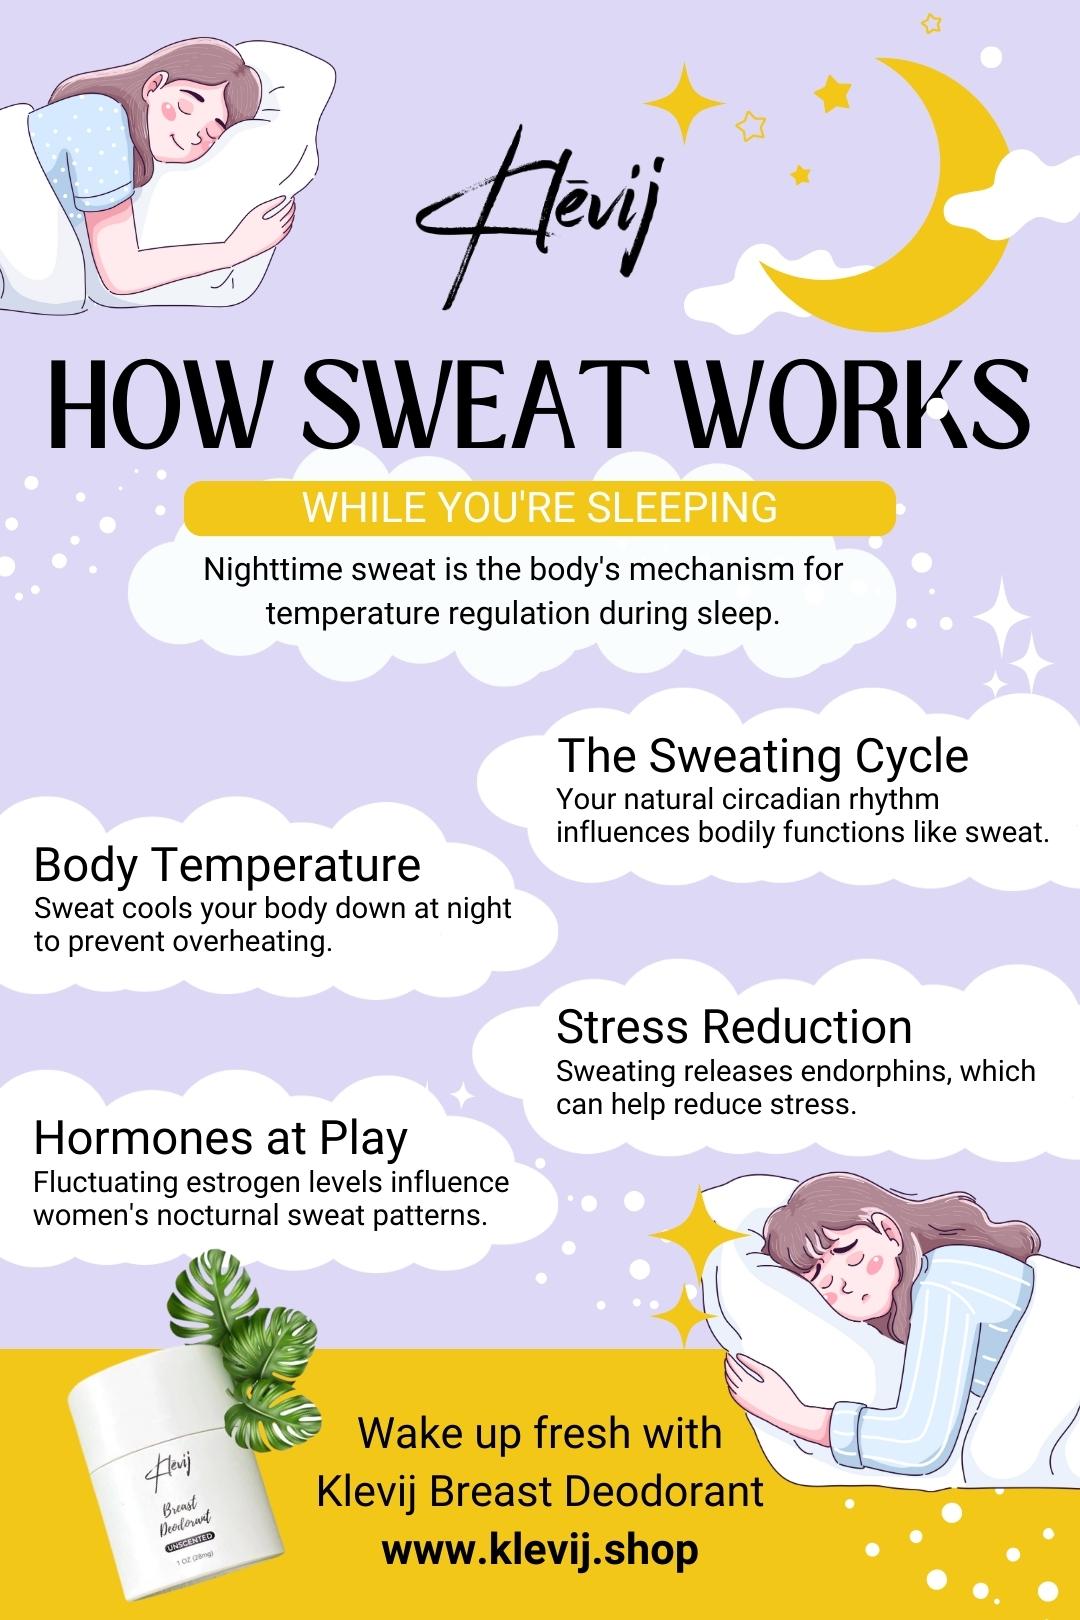 How Sweat Works infographic